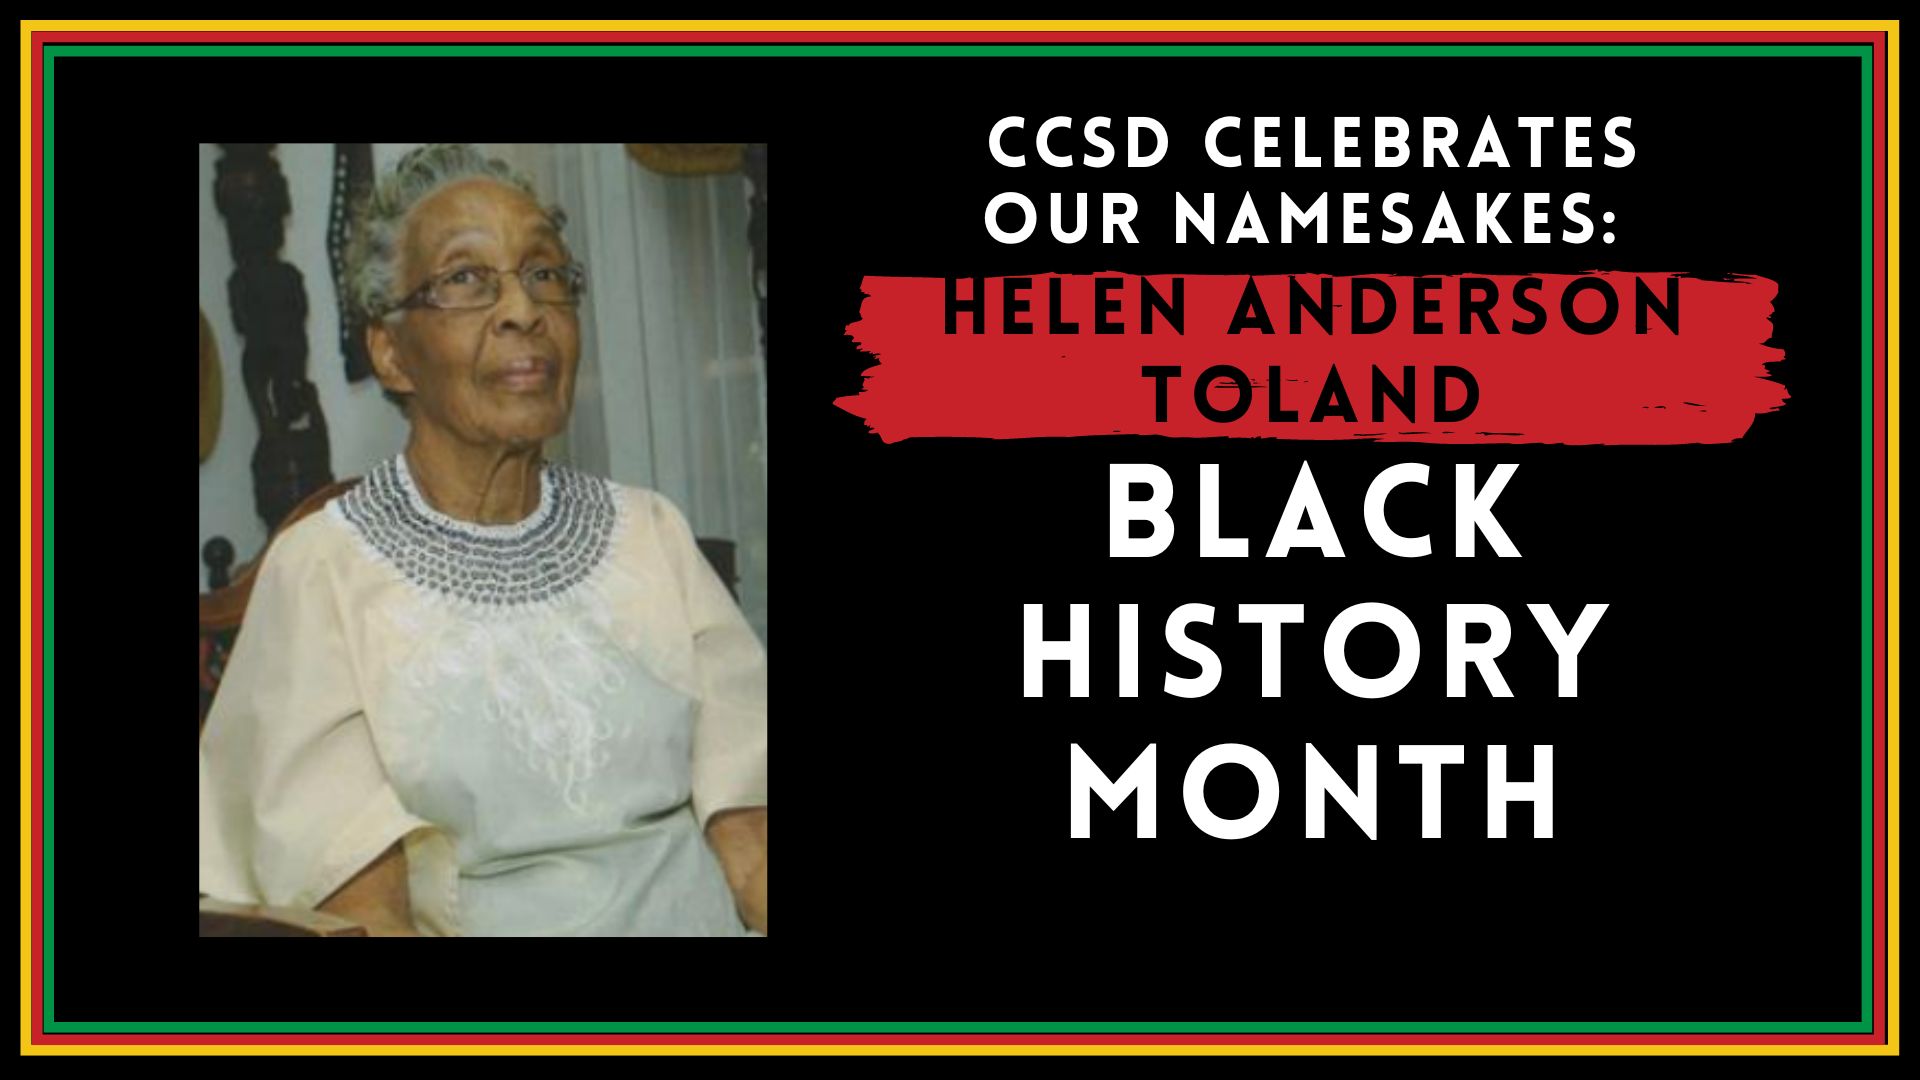 Celebrating CCSD leaders: Helen Anderson Toland